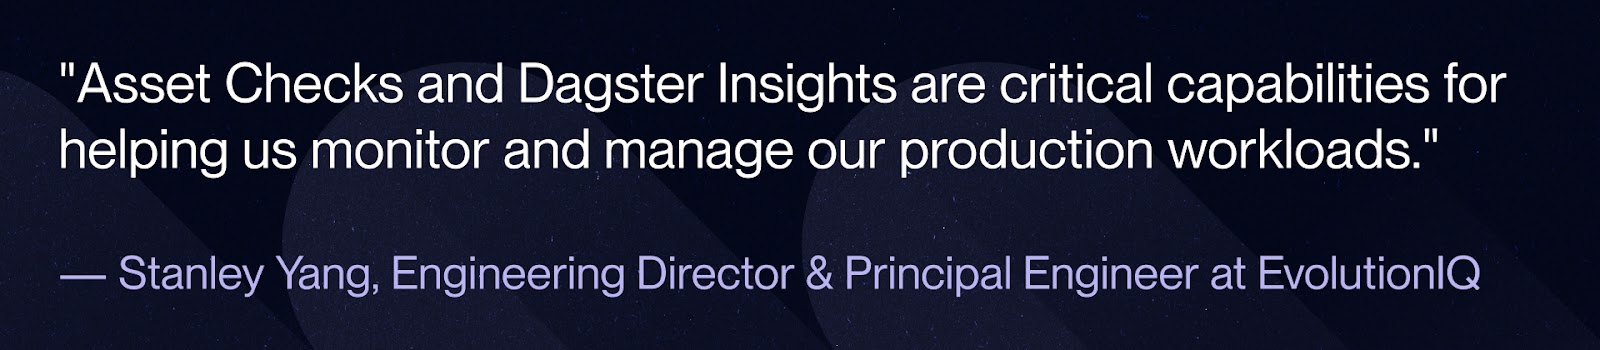 A quote from Stanley Yang, Engineering Director at EvolutionIQ on the effectiveness of Asset Checks and Dagster.